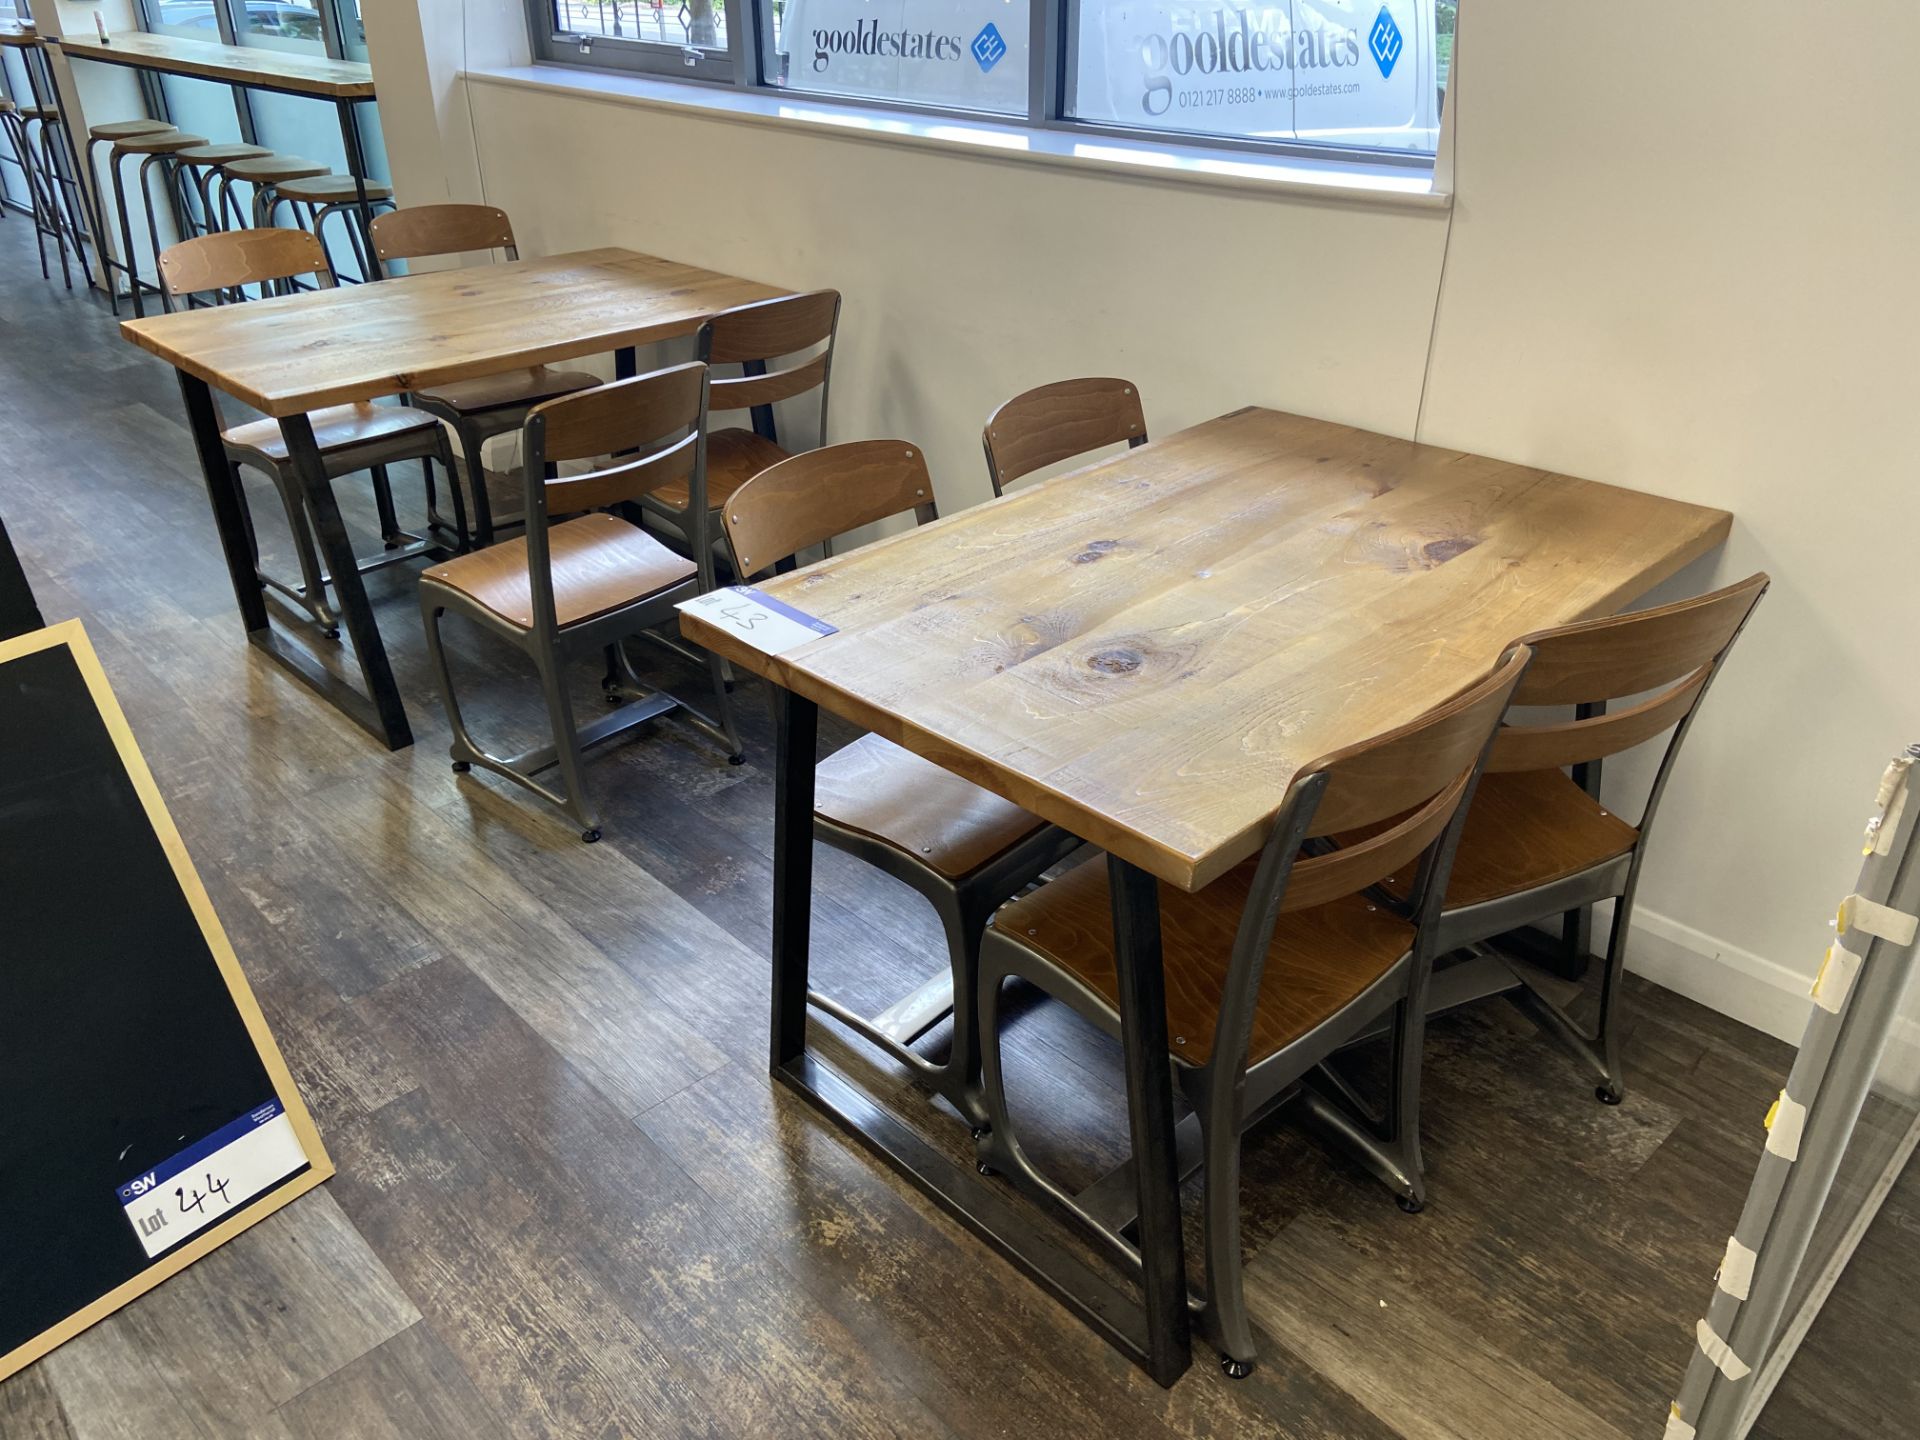 Two Steel Framed Laminated Top Dining Tables, each approx. 800mm x 1.2m, with eight steel framed